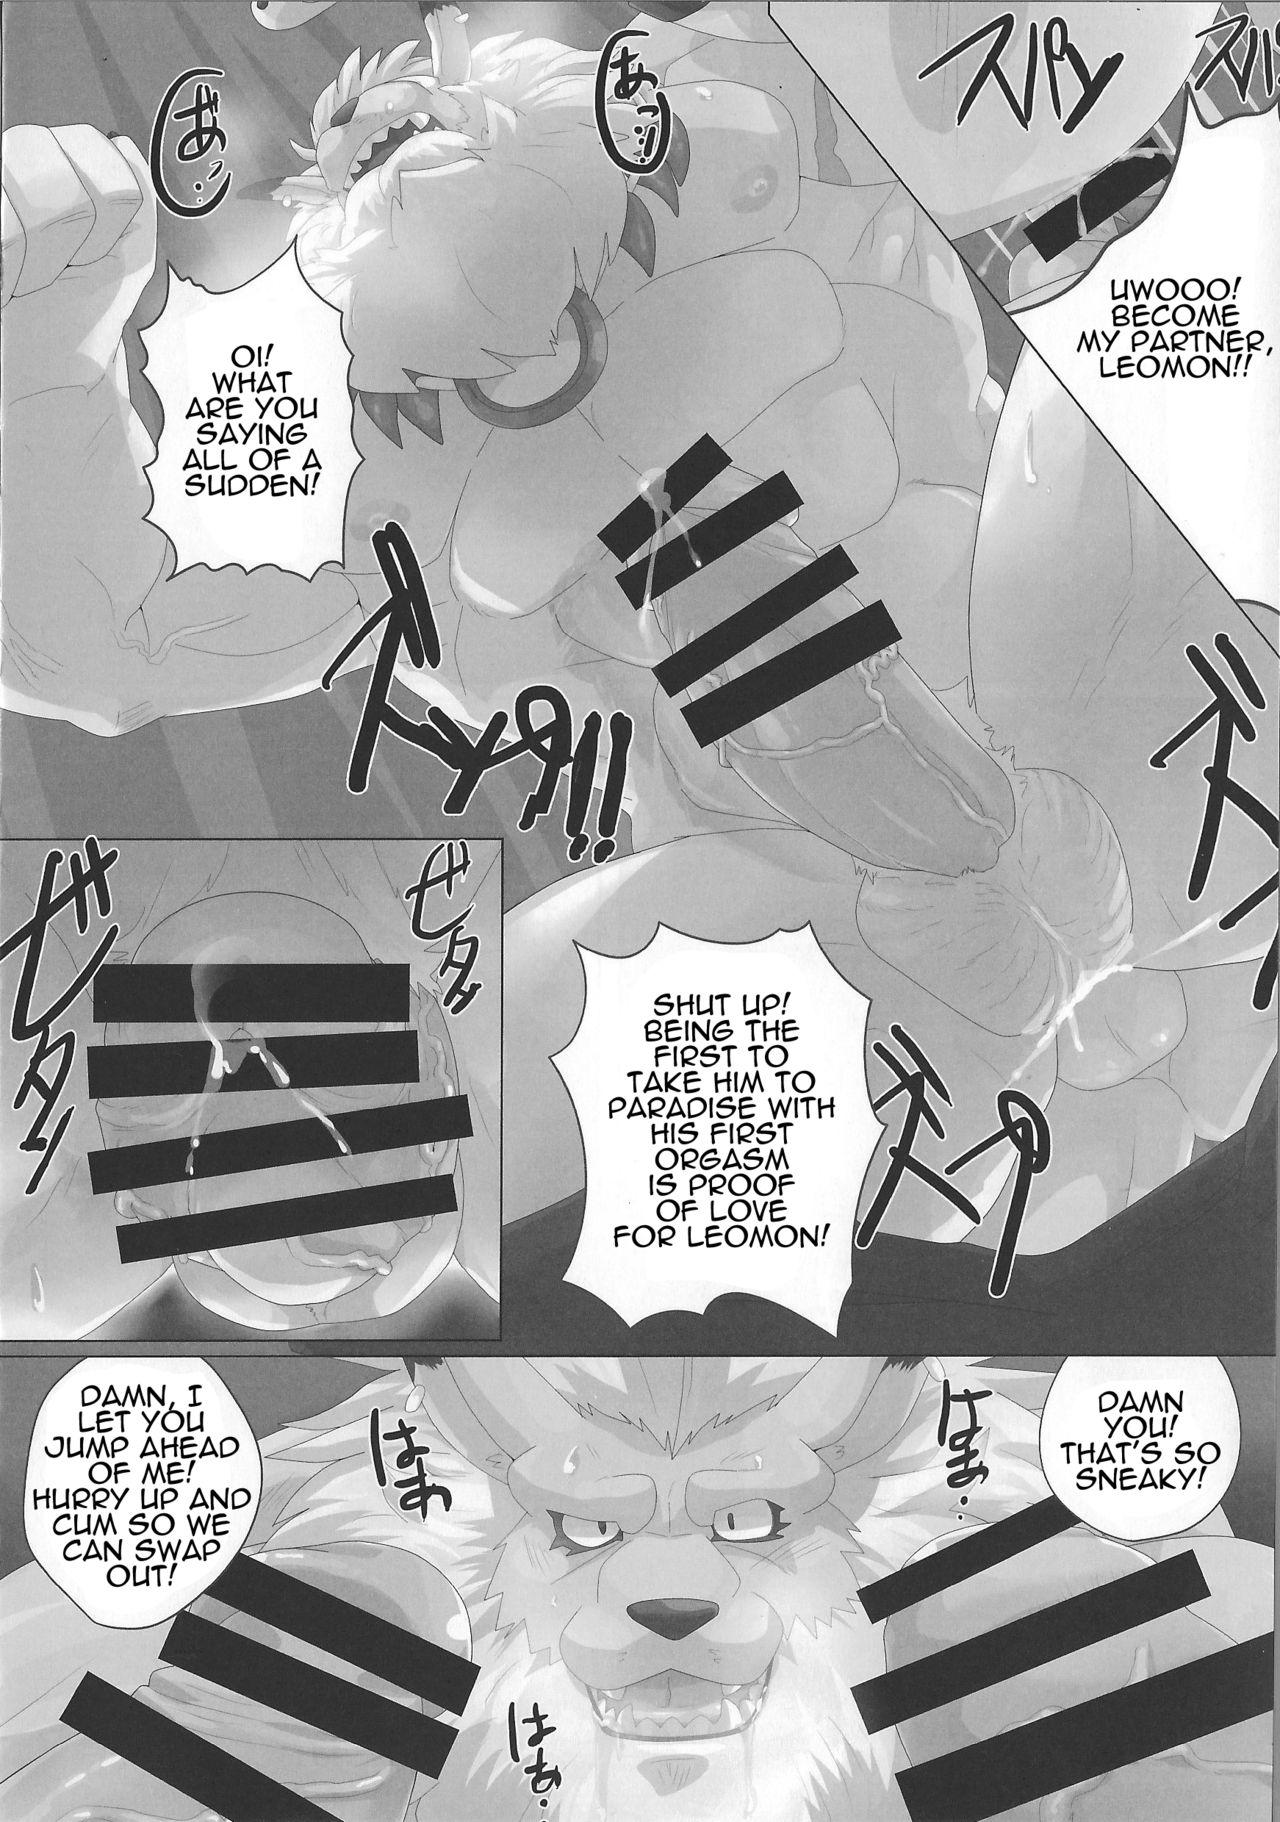 [Debirobu] For the Lion-Man Type Electric Life Form to Overturn Fate - Leomon Doujin [ENG] 15